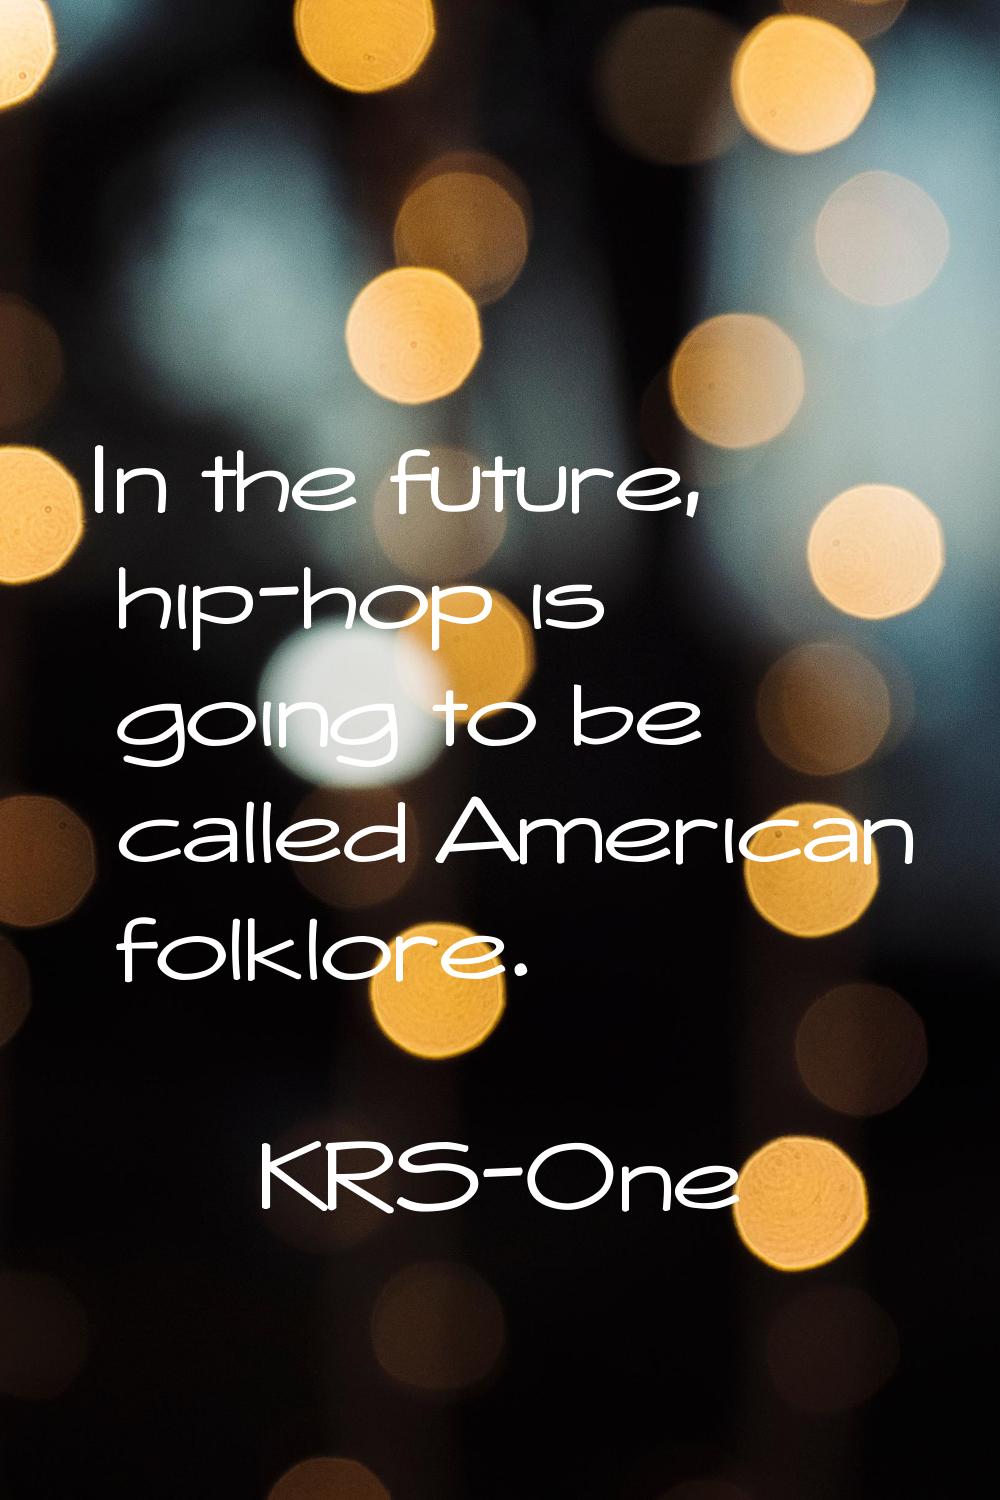 In the future, hip-hop is going to be called American folklore.